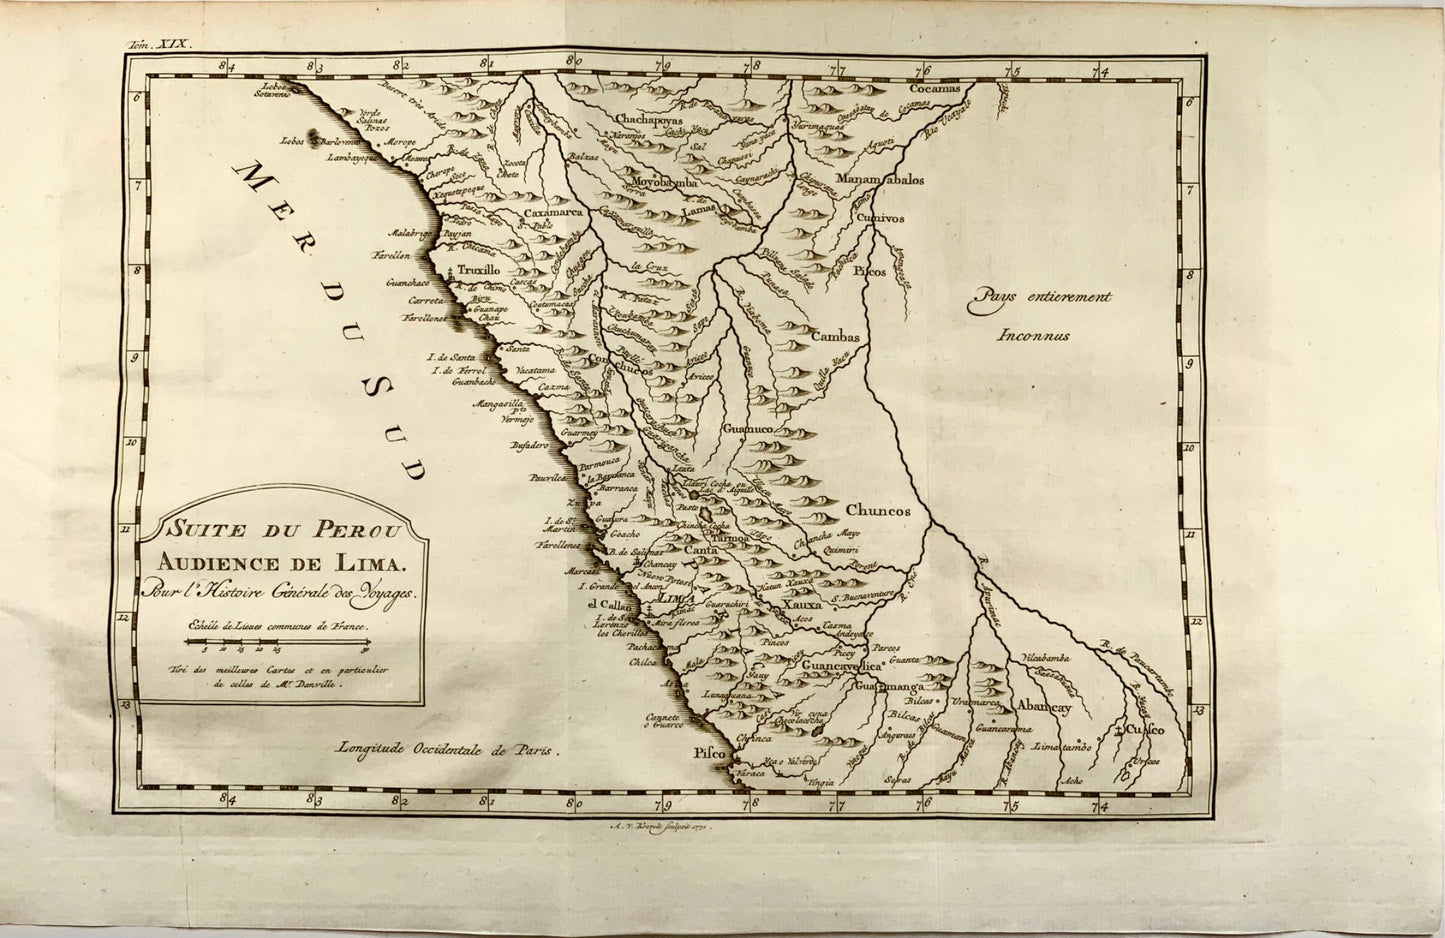 1756 d’ Anville map of the coast of Peru by Bellin, including Lima